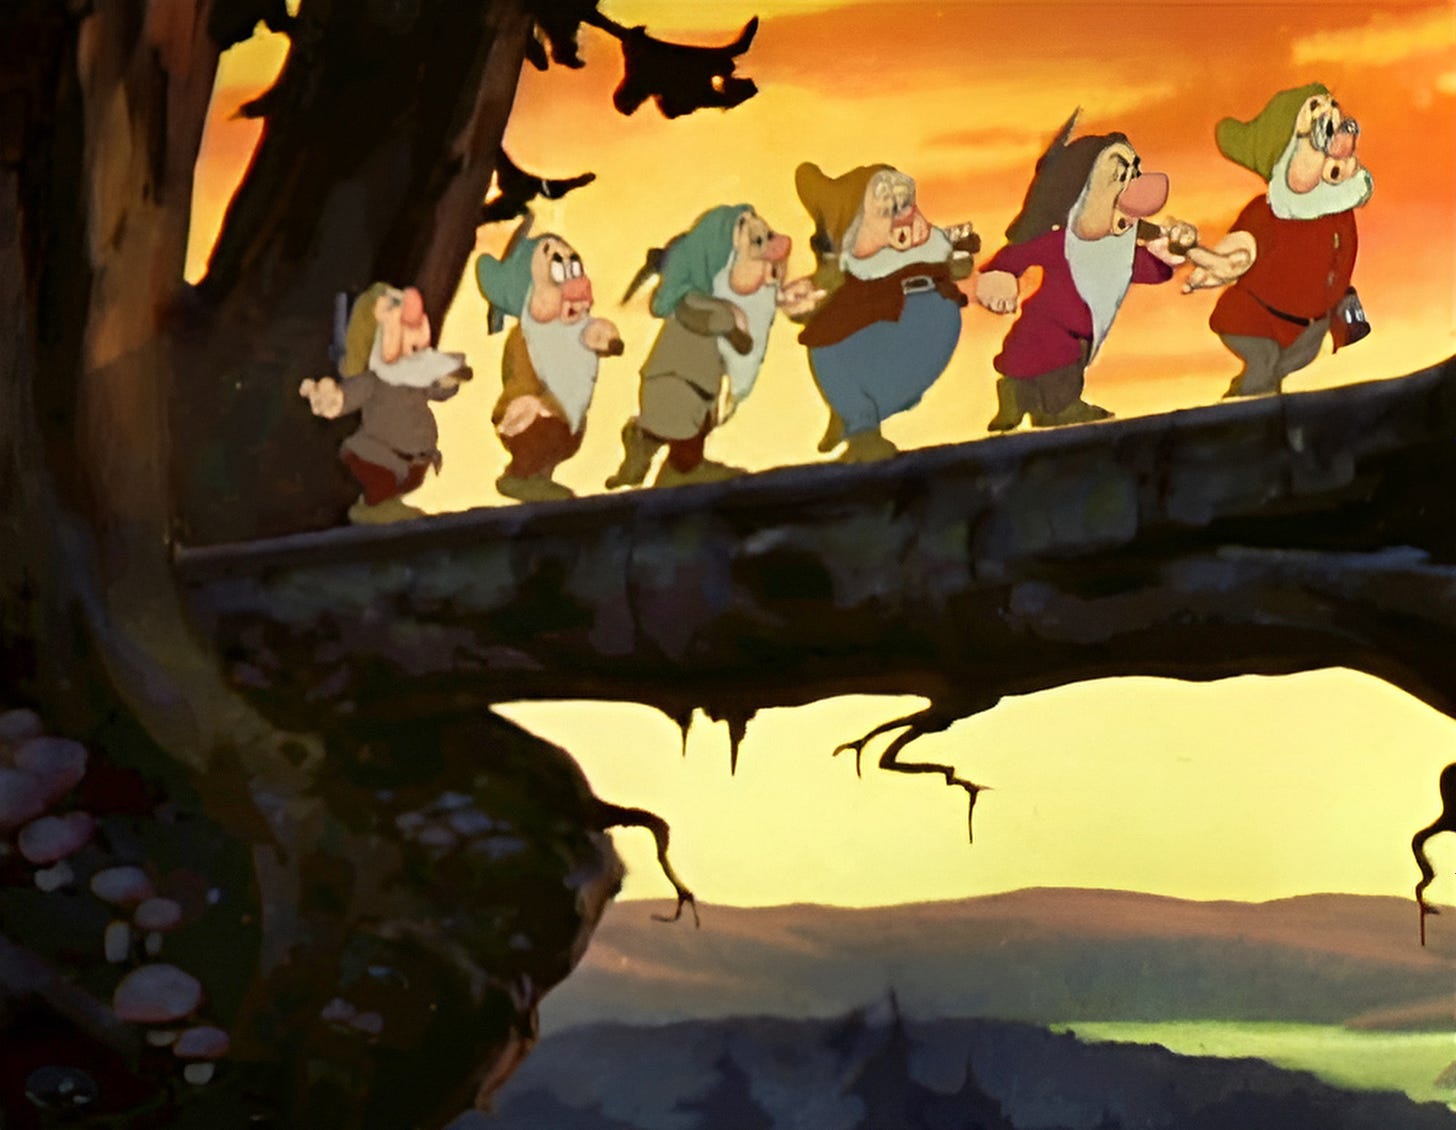 Snow White and the Seven Dwarfs is the first animated feature in the Disney animated features canon. It was produced by Walt Disney Productions, premiered on December 21, 1937, and was originally released to theatres by RKO Radio Pictures on February 8, 1938.